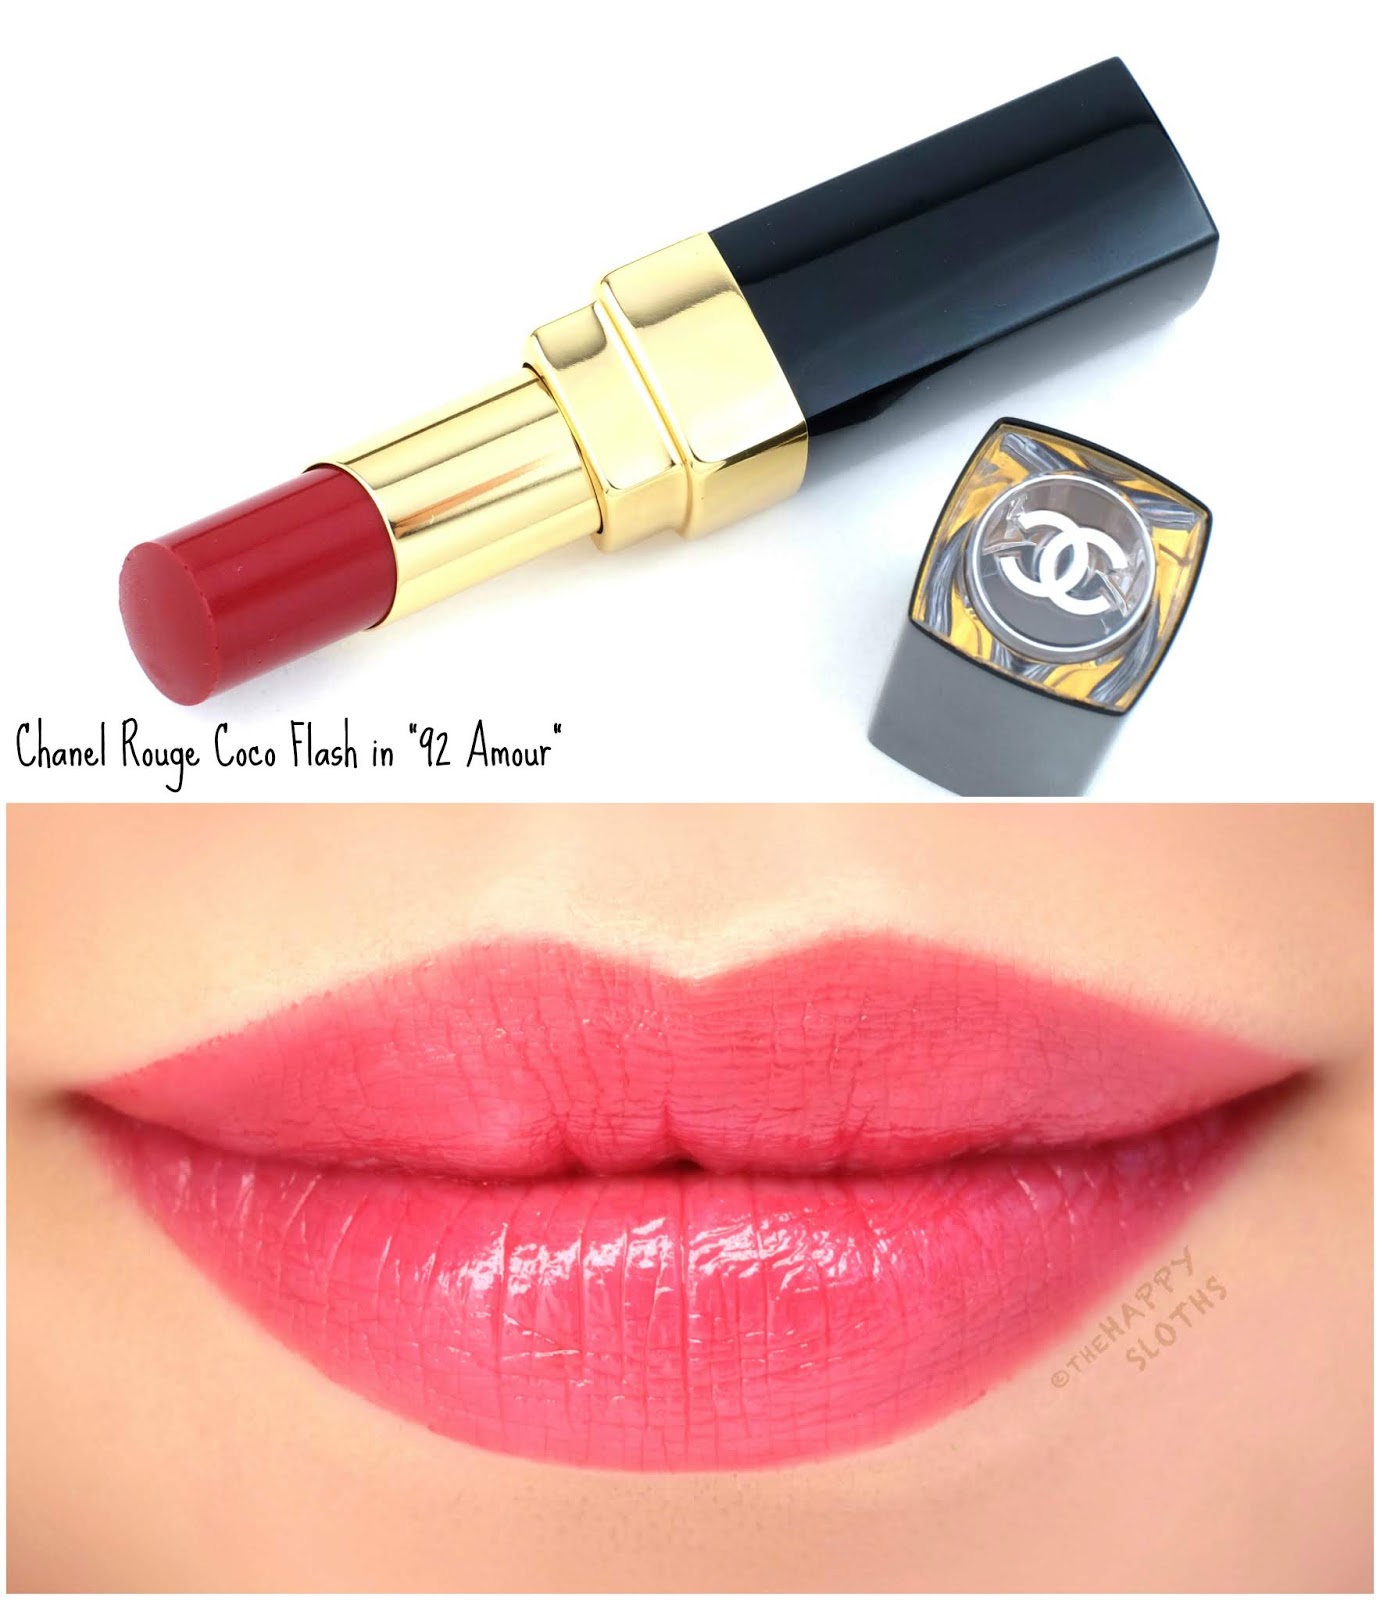 Chanel | Rouge Coco Flash in "92 Amour": Review and Swatches